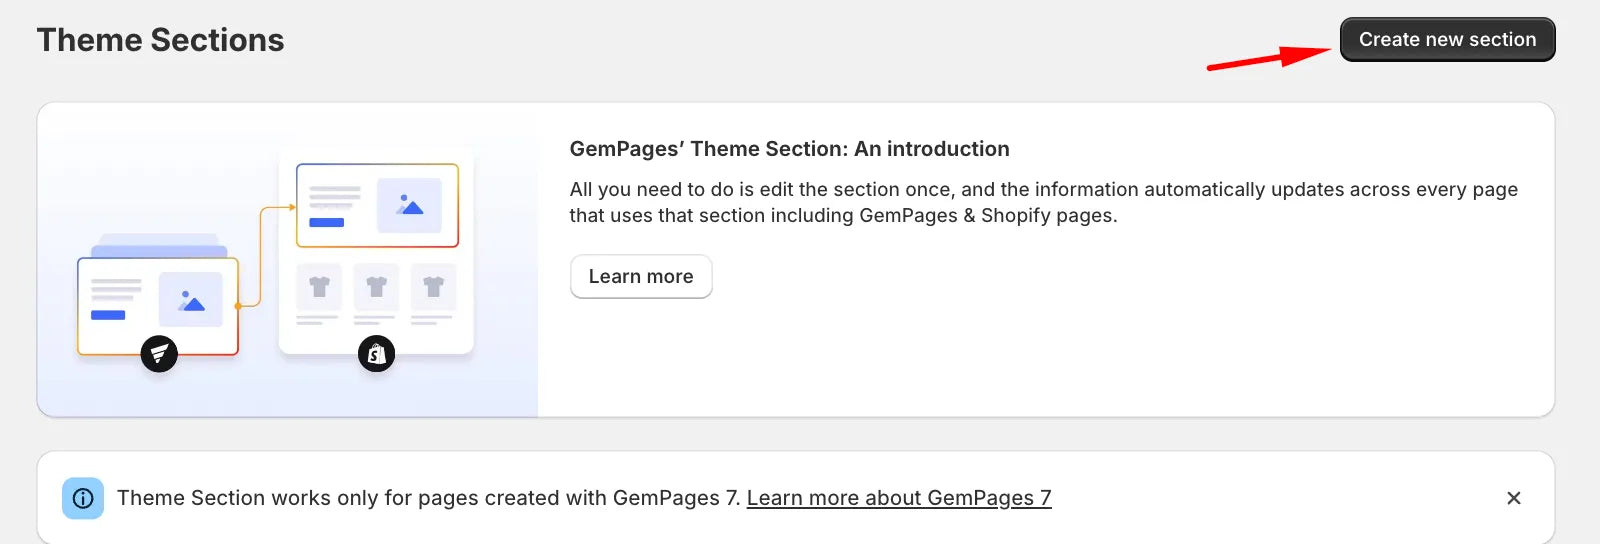 A screenshot of GemPages’ dashboard highlighting its Theme Section button.